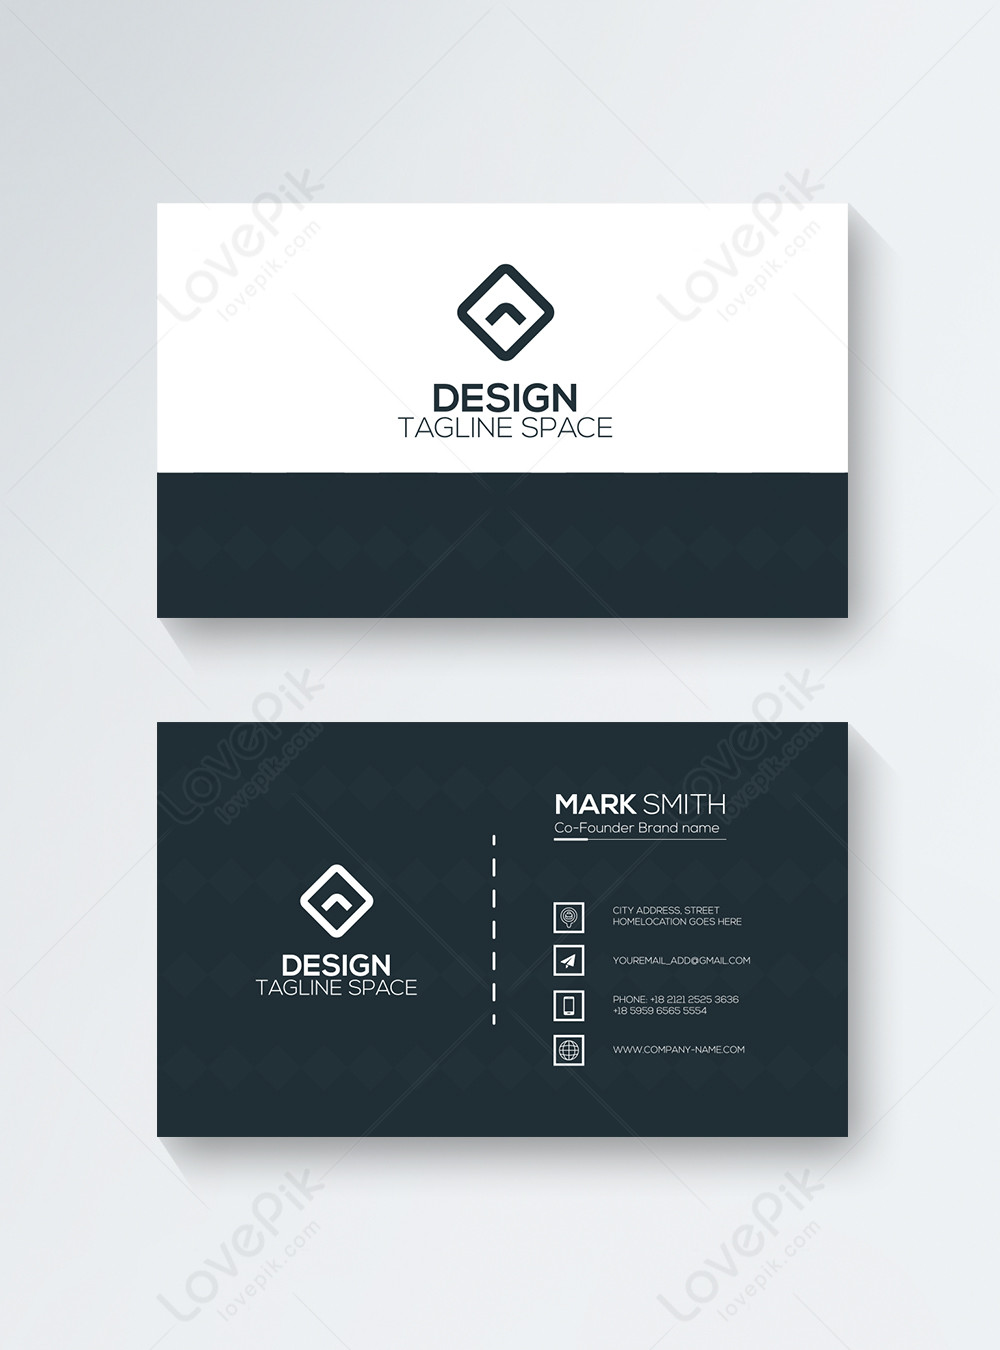 Modern and corporate business card template image_picture free download ...